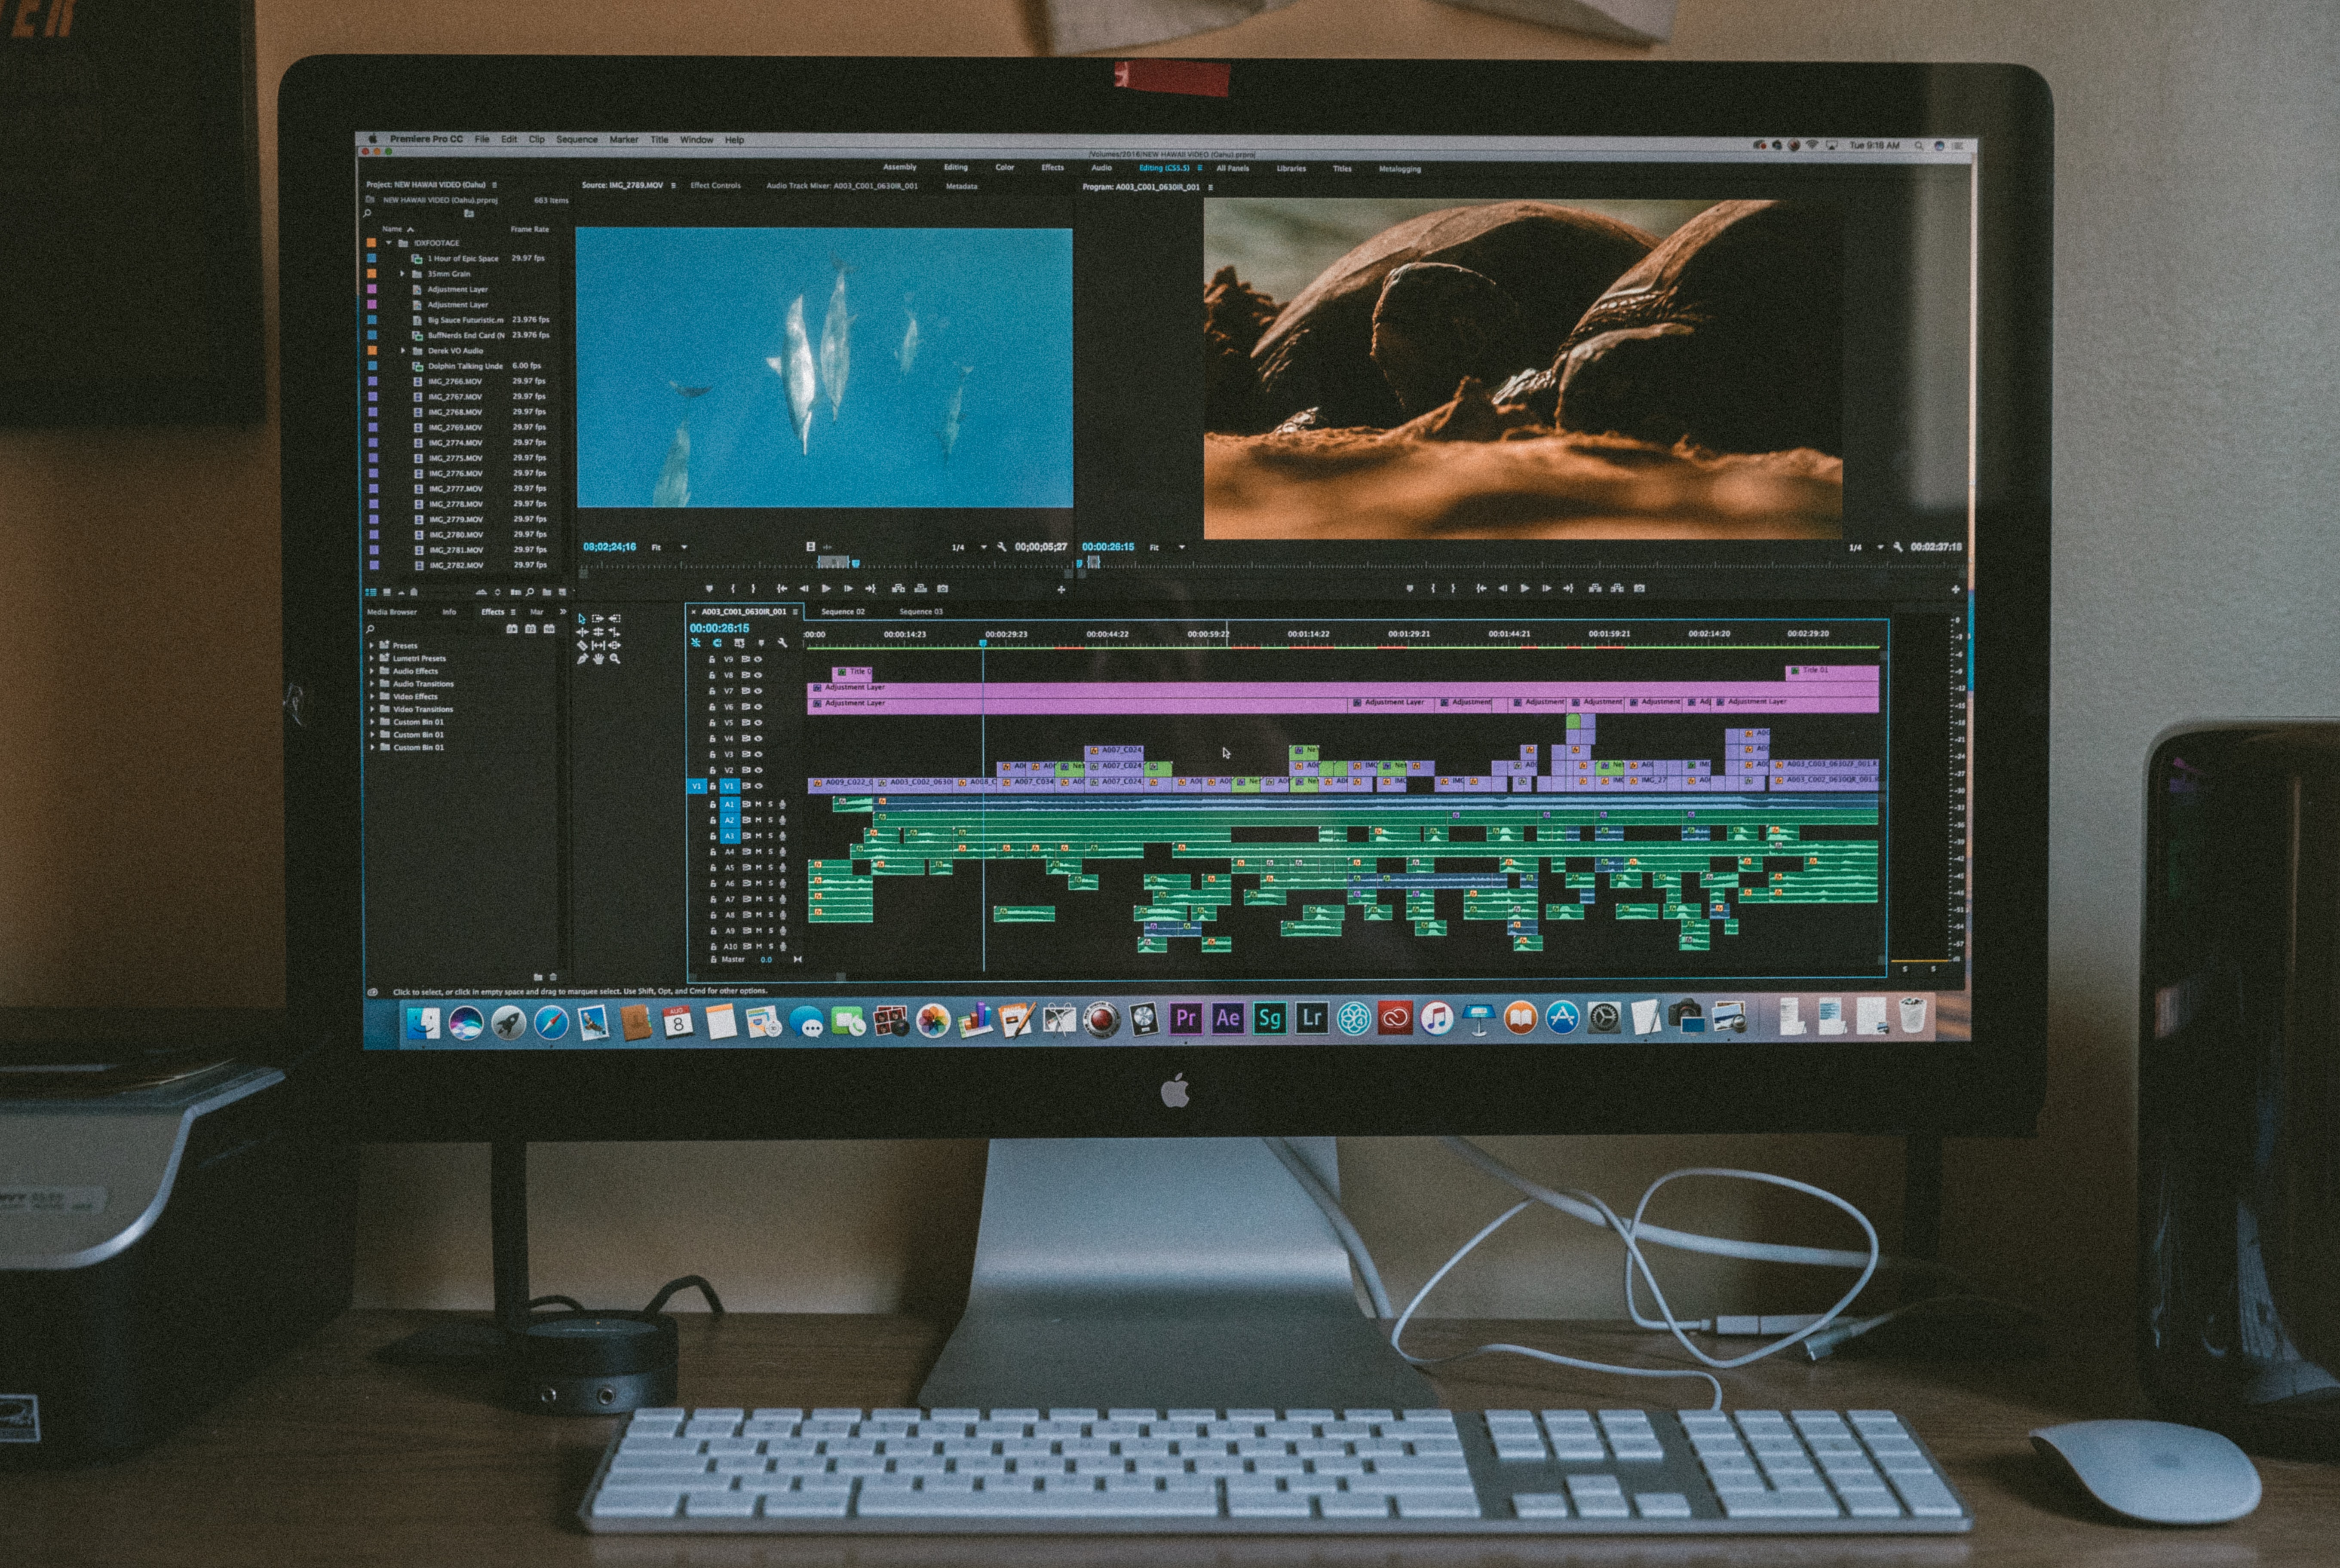 Video editing skills are in high demand in 2021. Photo by <a href="https://unsplash.com/@jakobowens1?utm_source=unsplash&utm_medium=referral&utm_content=creditCopyText">Jakob Owens</a> on <a href="https://unsplash.com/s/photos/video?utm_source=unsplash&utm_medium=referral&utm_content=creditCopyText">Unsplash</a>.   